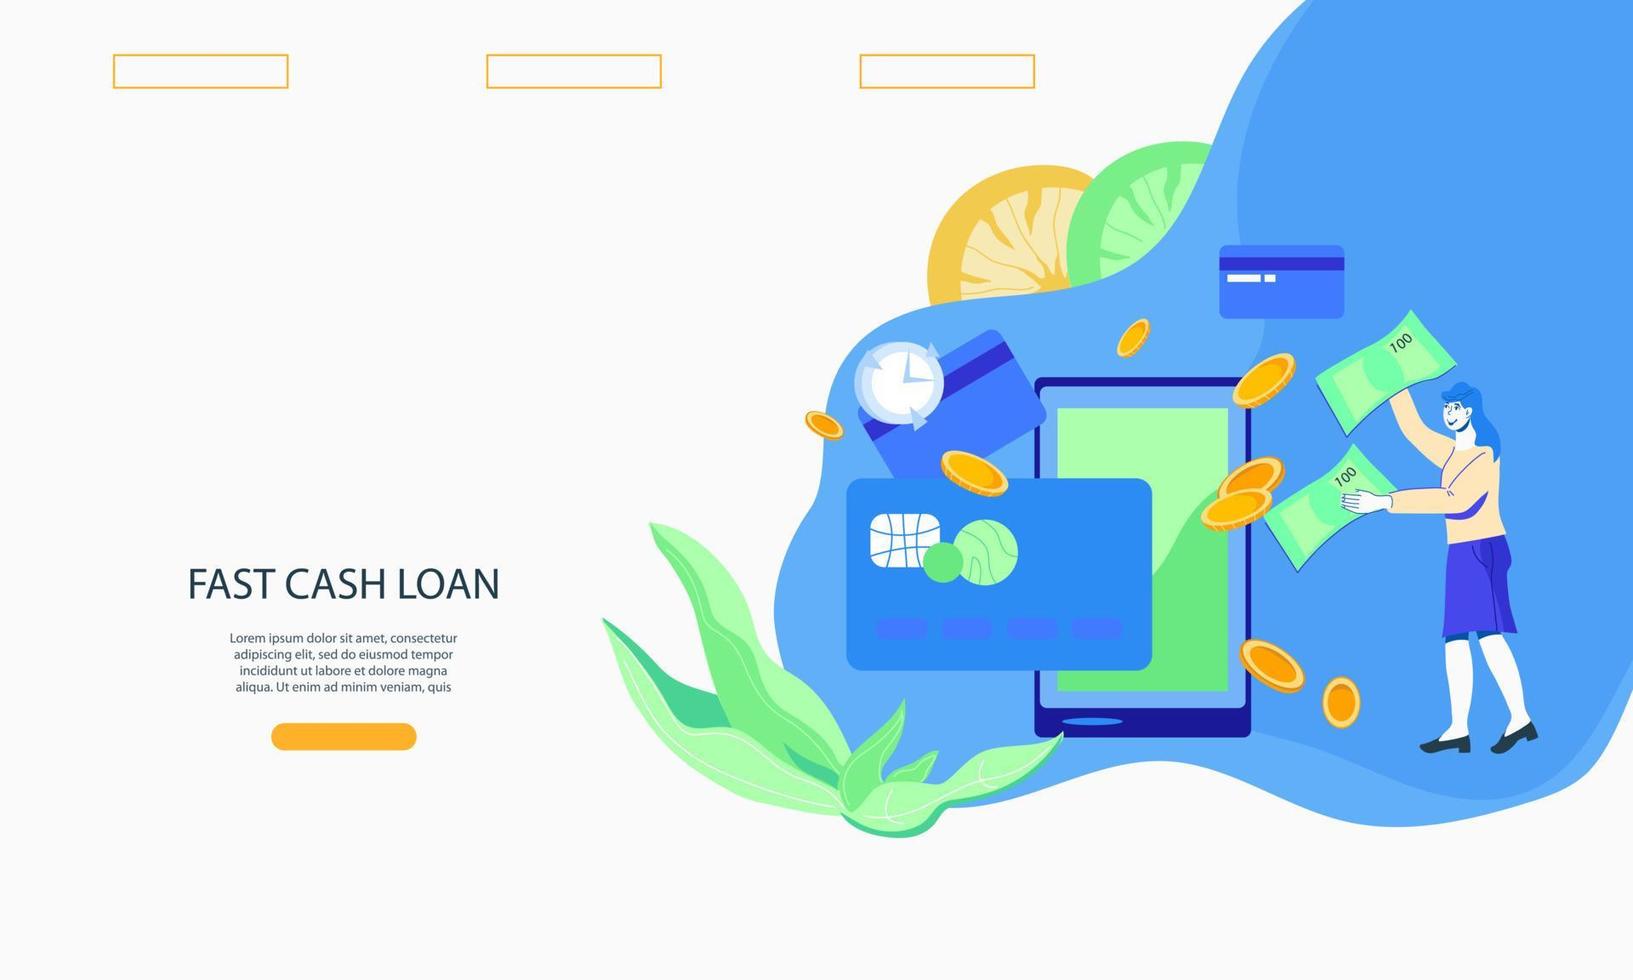 Fast cash loan and quick money transfer financial services web page template with cartoon character of woman near mobile phone. Credit approval or contract conclusion online, flat vector illustration.